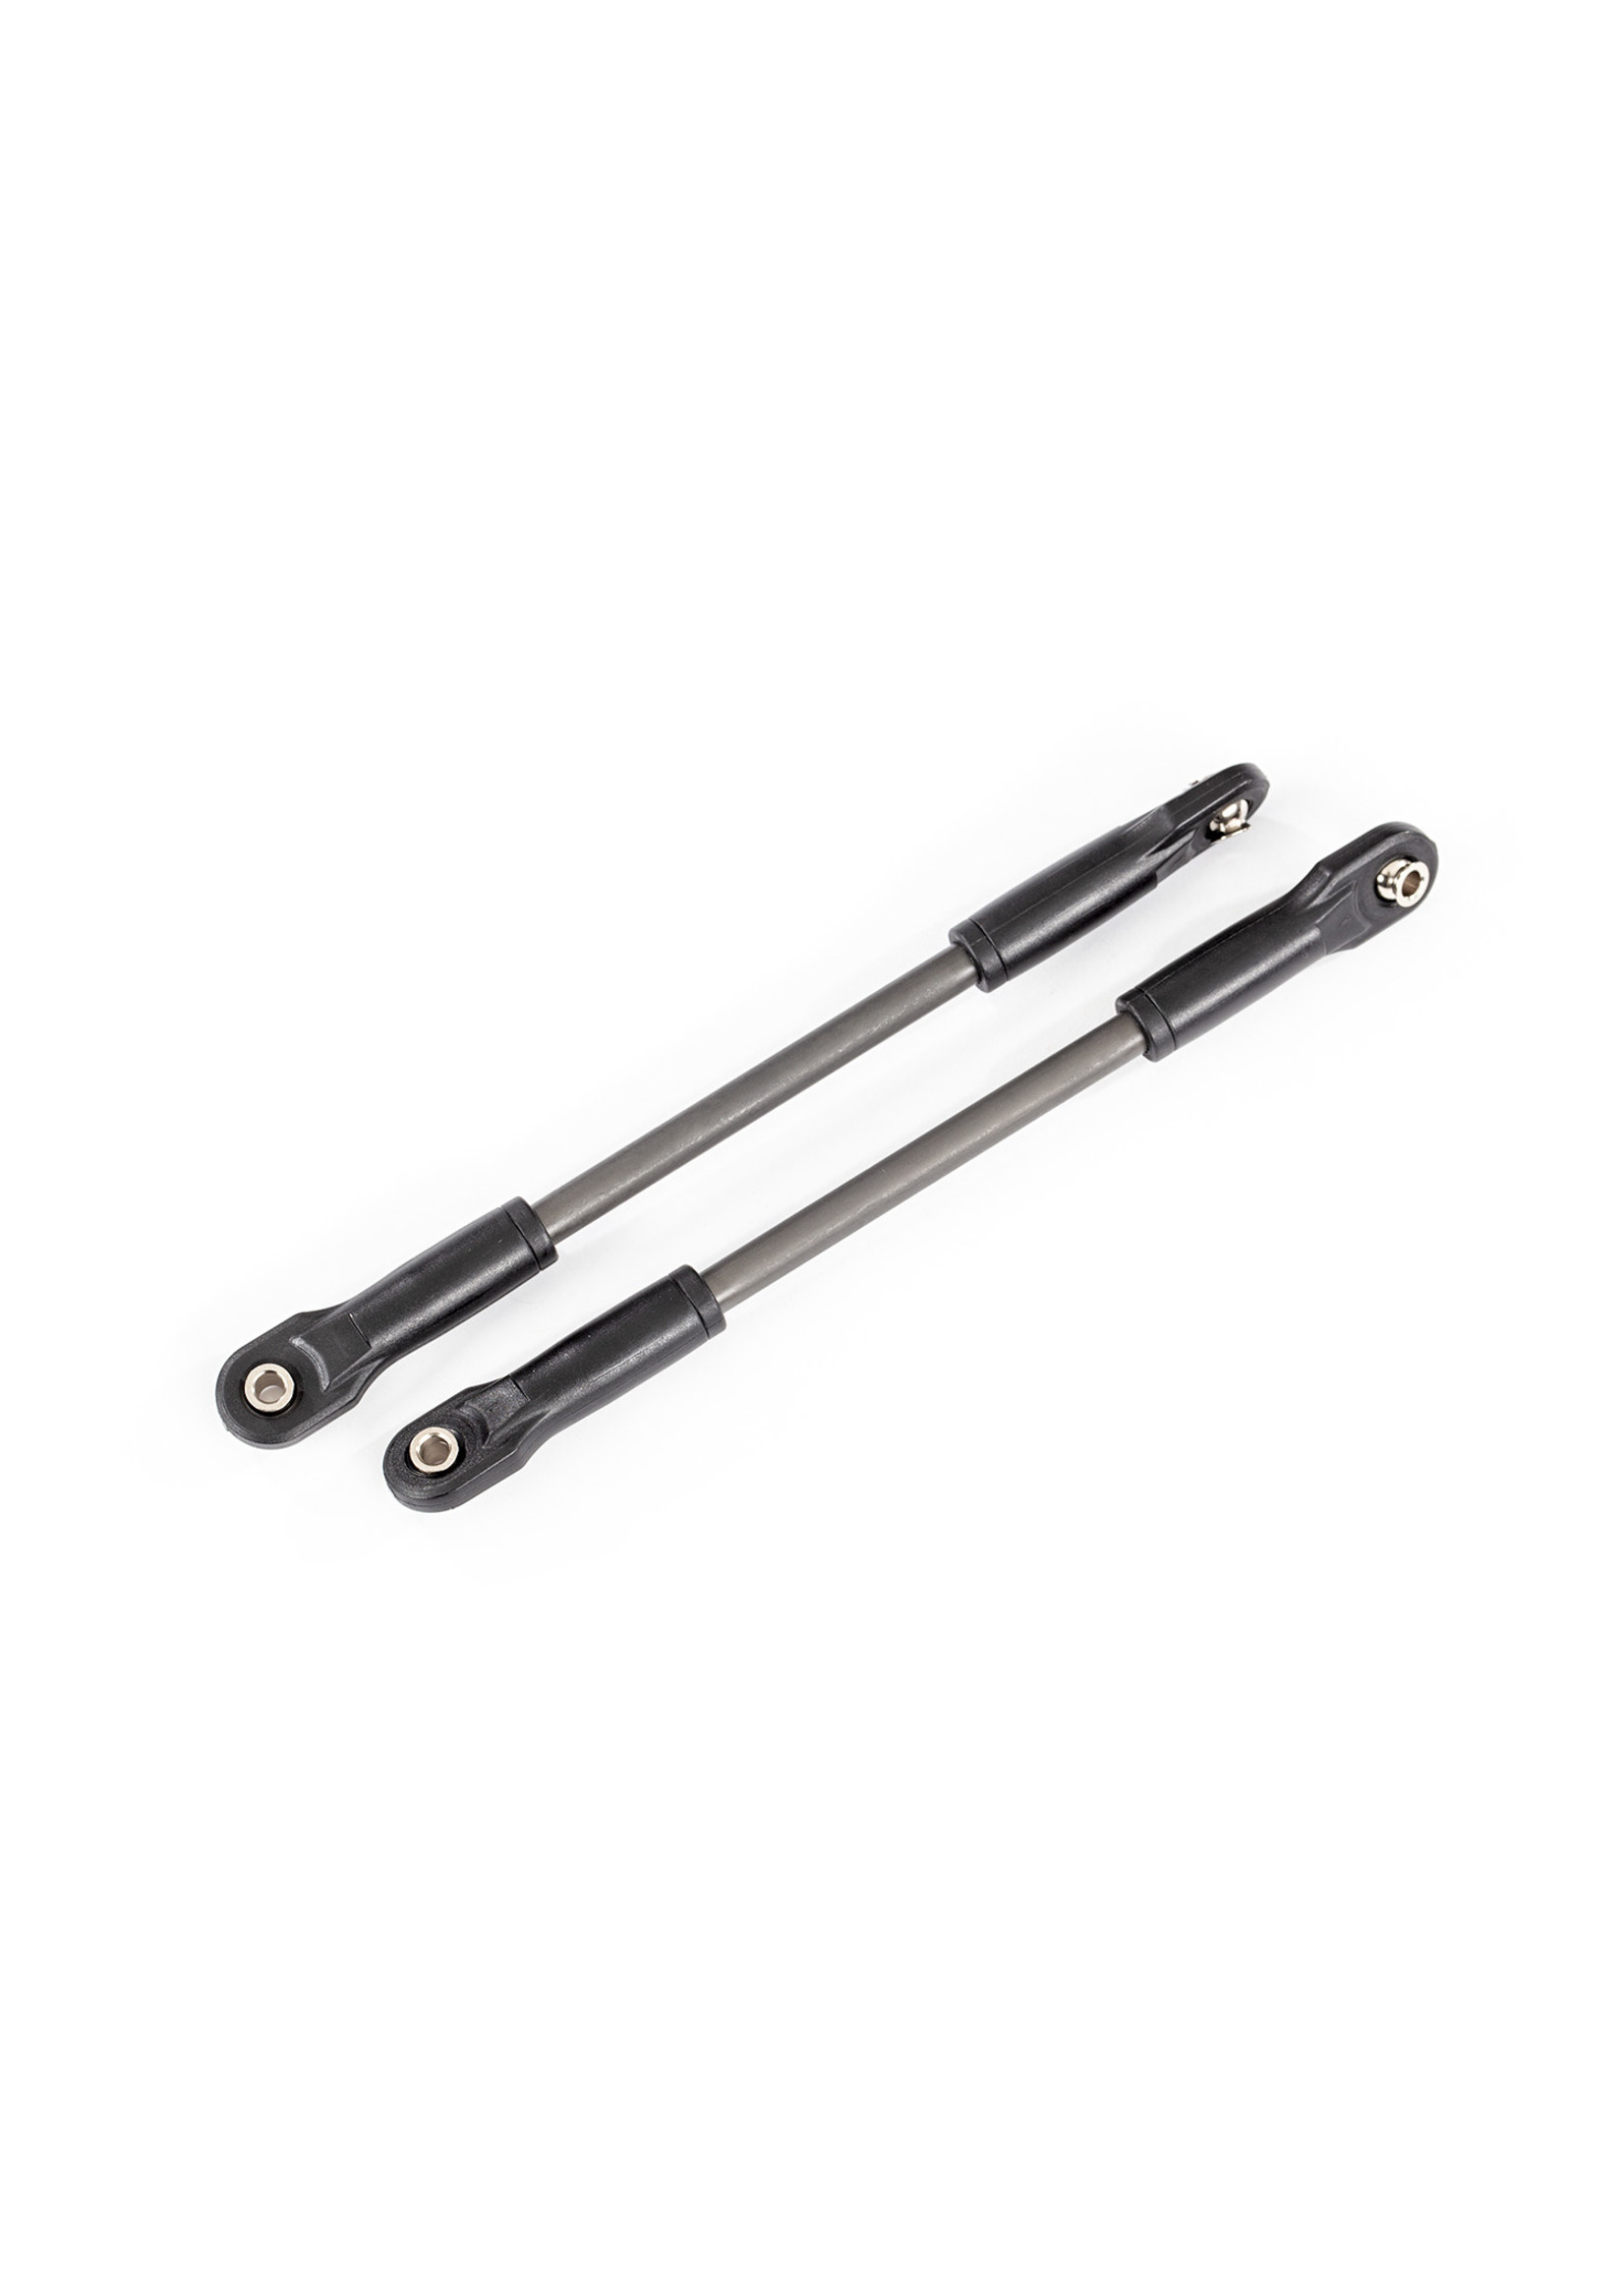 Traxxas 8619 - Push Rod - Steel - Assembled with Rod Ends